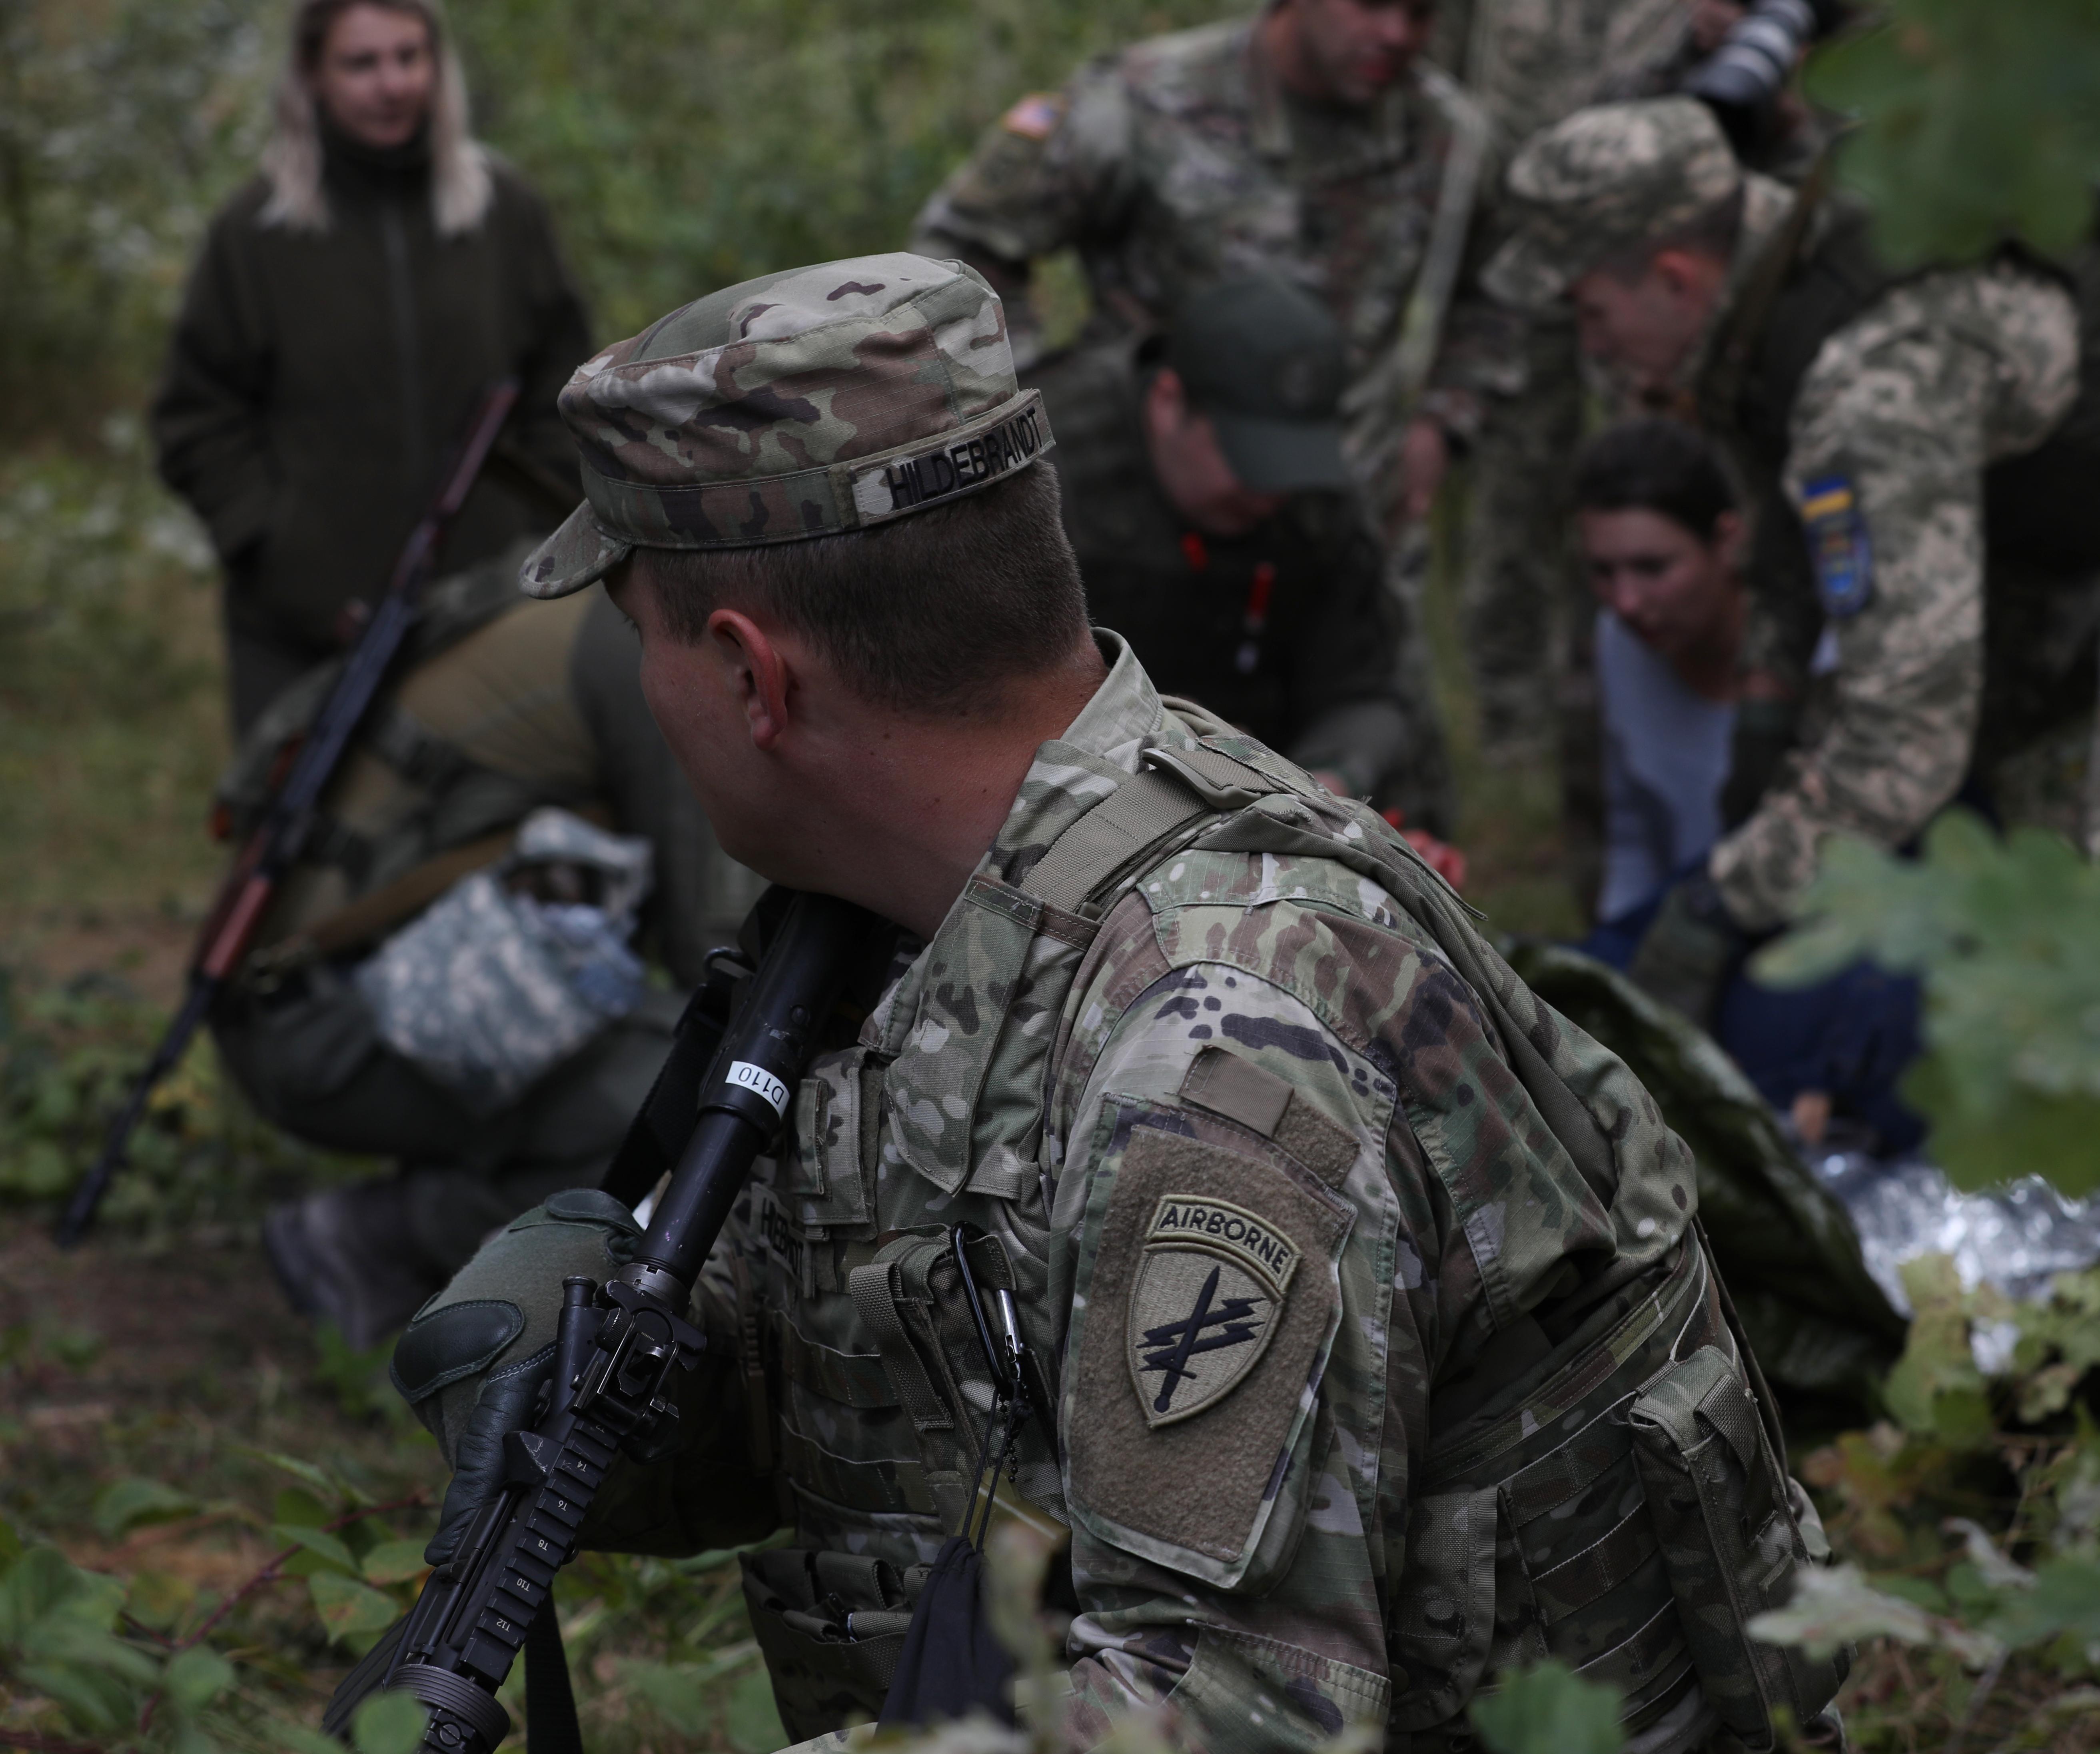 U.S. Army Sgt. Clayton Hildebrandt, a civil affairs noncommissioned officer with the Civil Military Operations Center, looks over his shoulder as Ukraine soldiers administer first aid to a simulated casualty during the medical situational training exercise, as one of the training objectives for Rapid Trident 2019 in Yavoriv, Ukraine, Sept. 19, 2019.